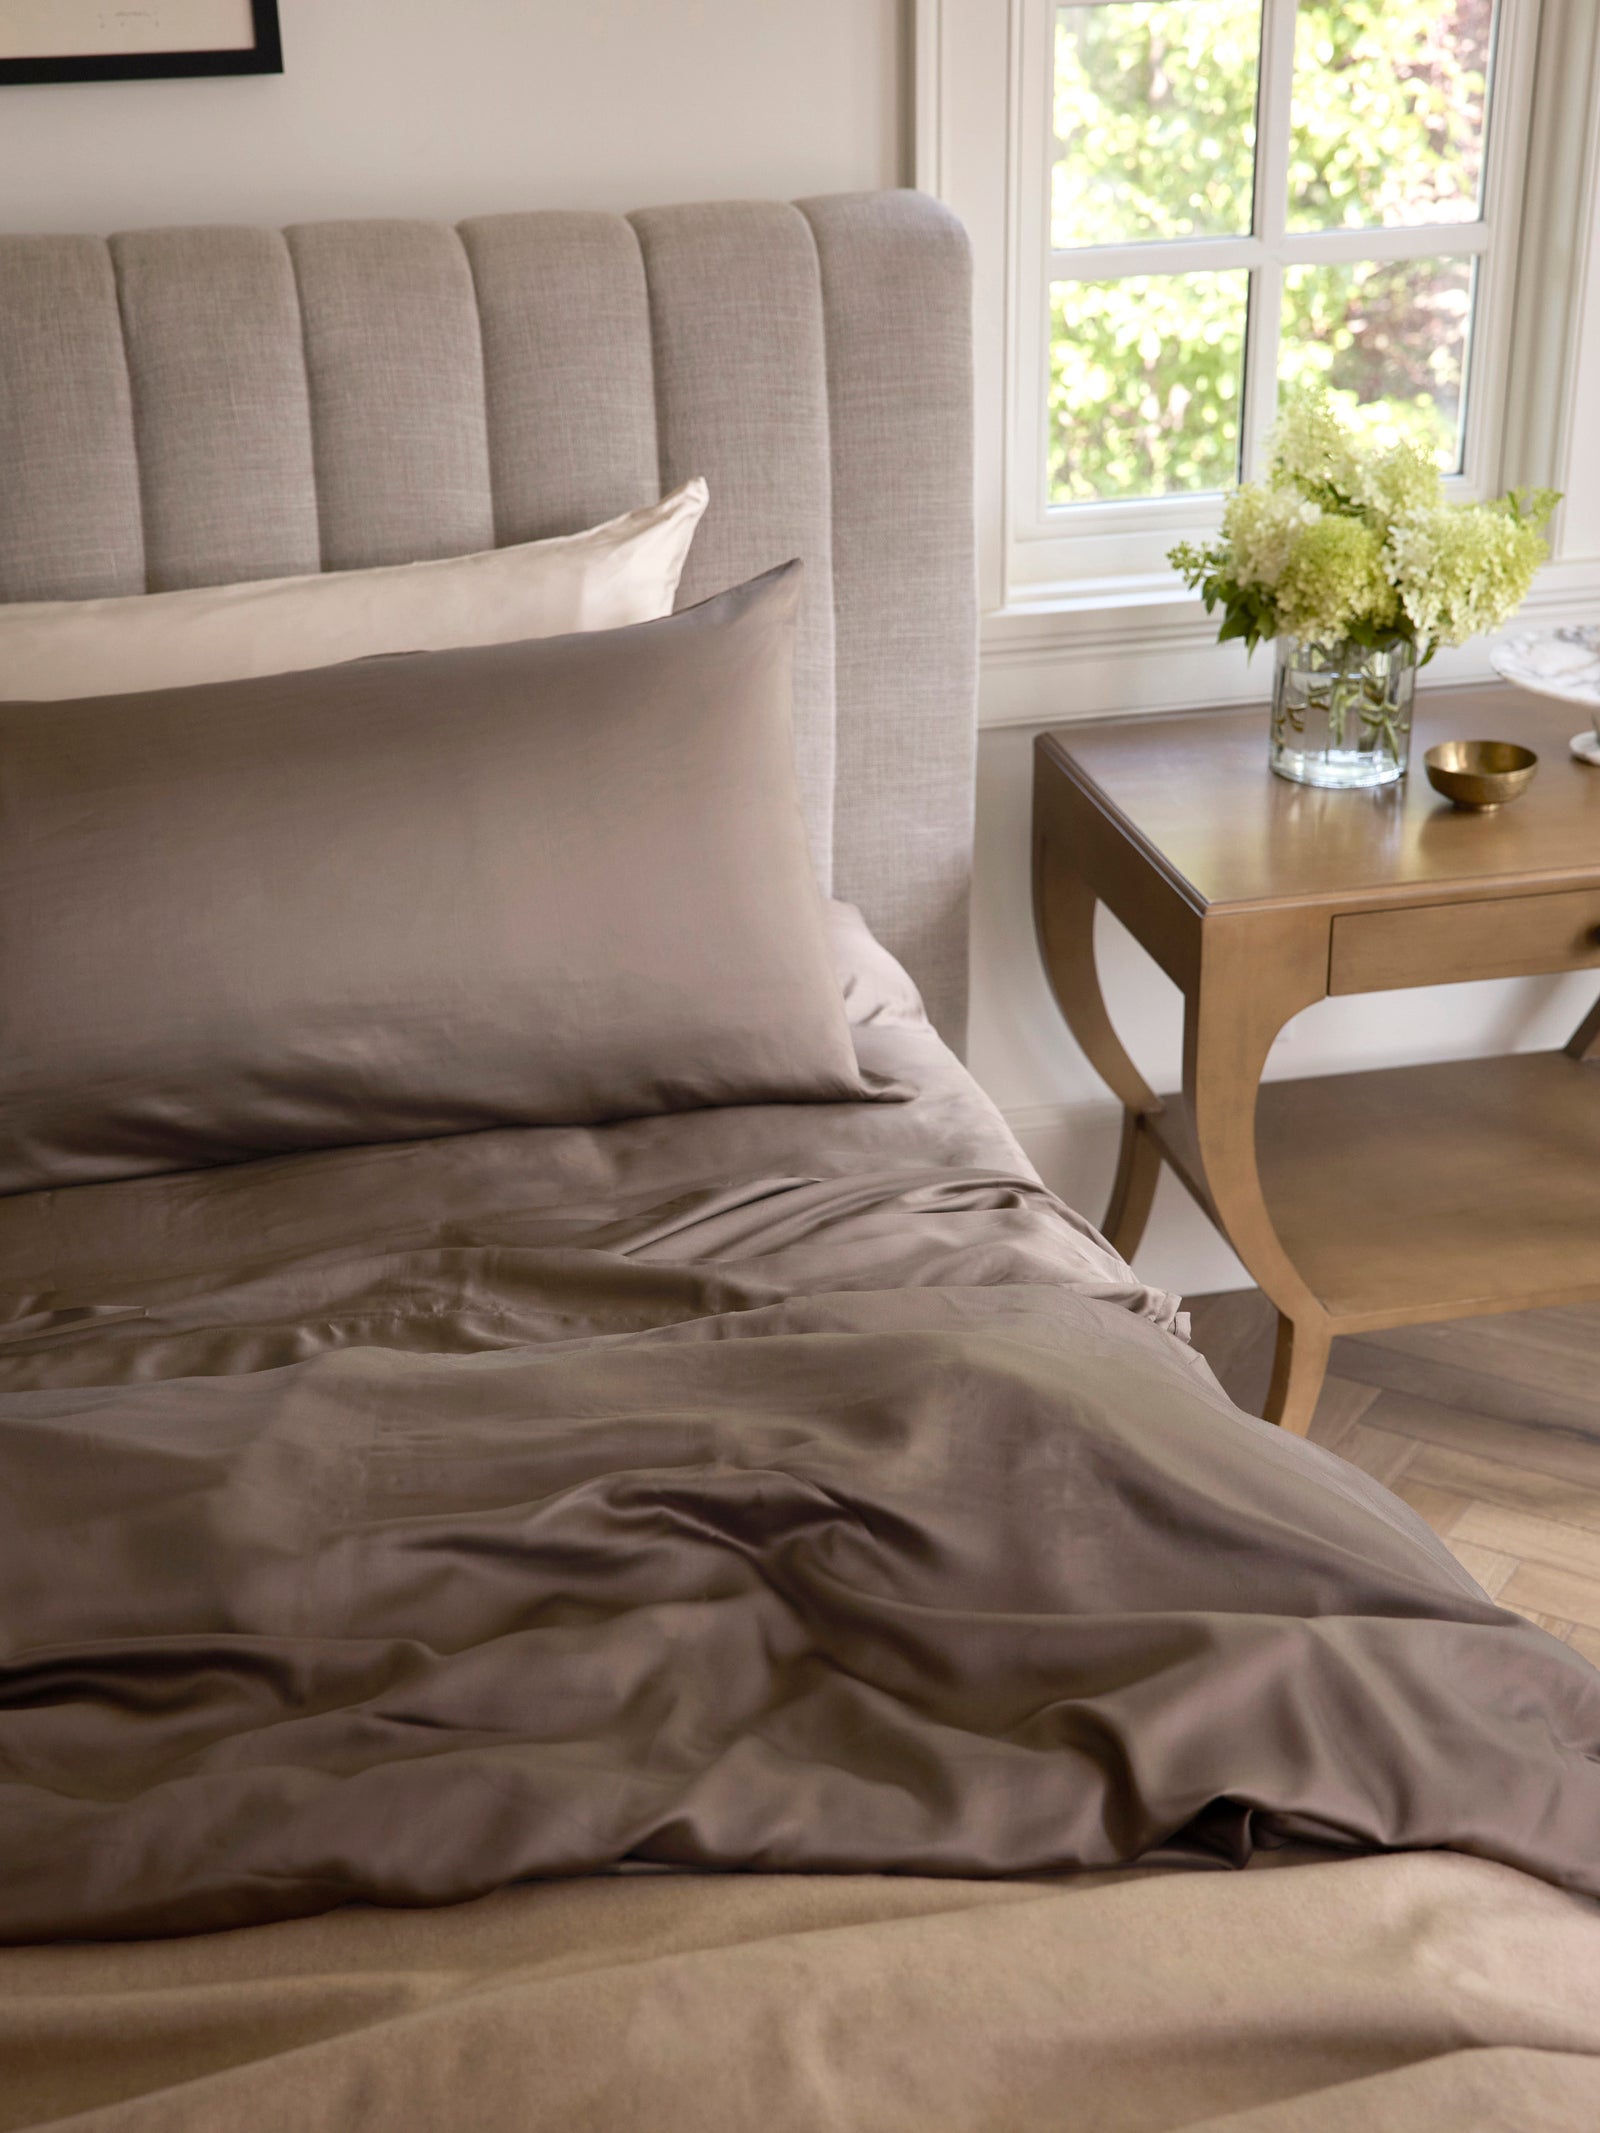 Unmade bed with walnut bedding and wooden nightstand to the side 